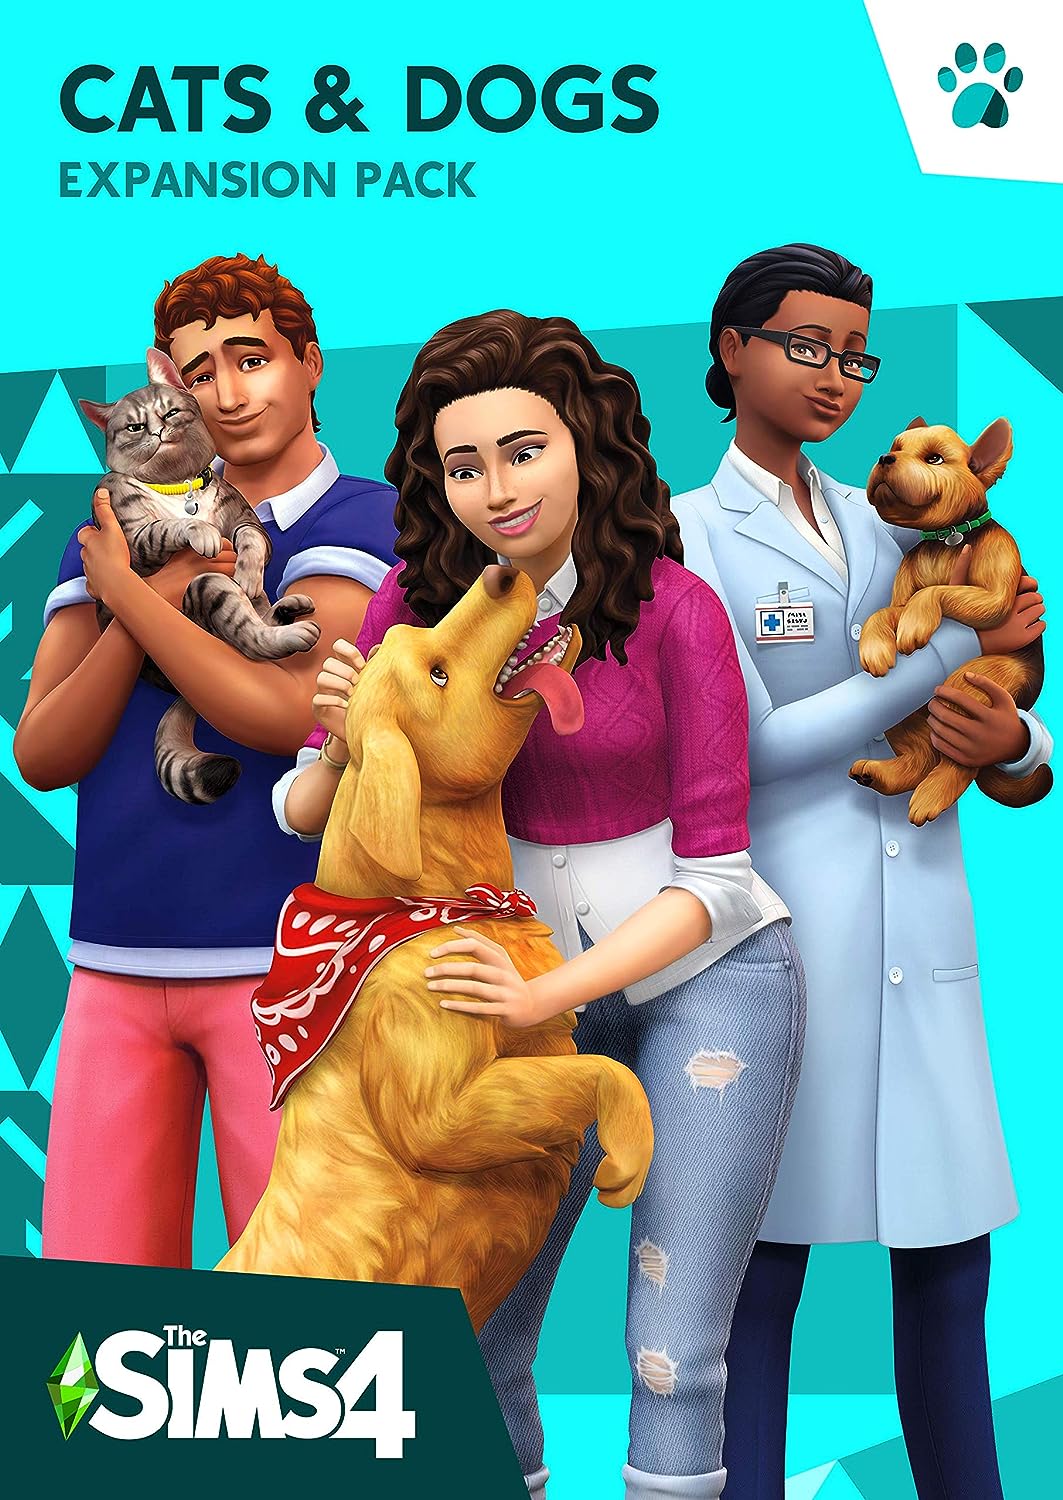 The Sims 4 - Cats & Dogs Expansion Pack